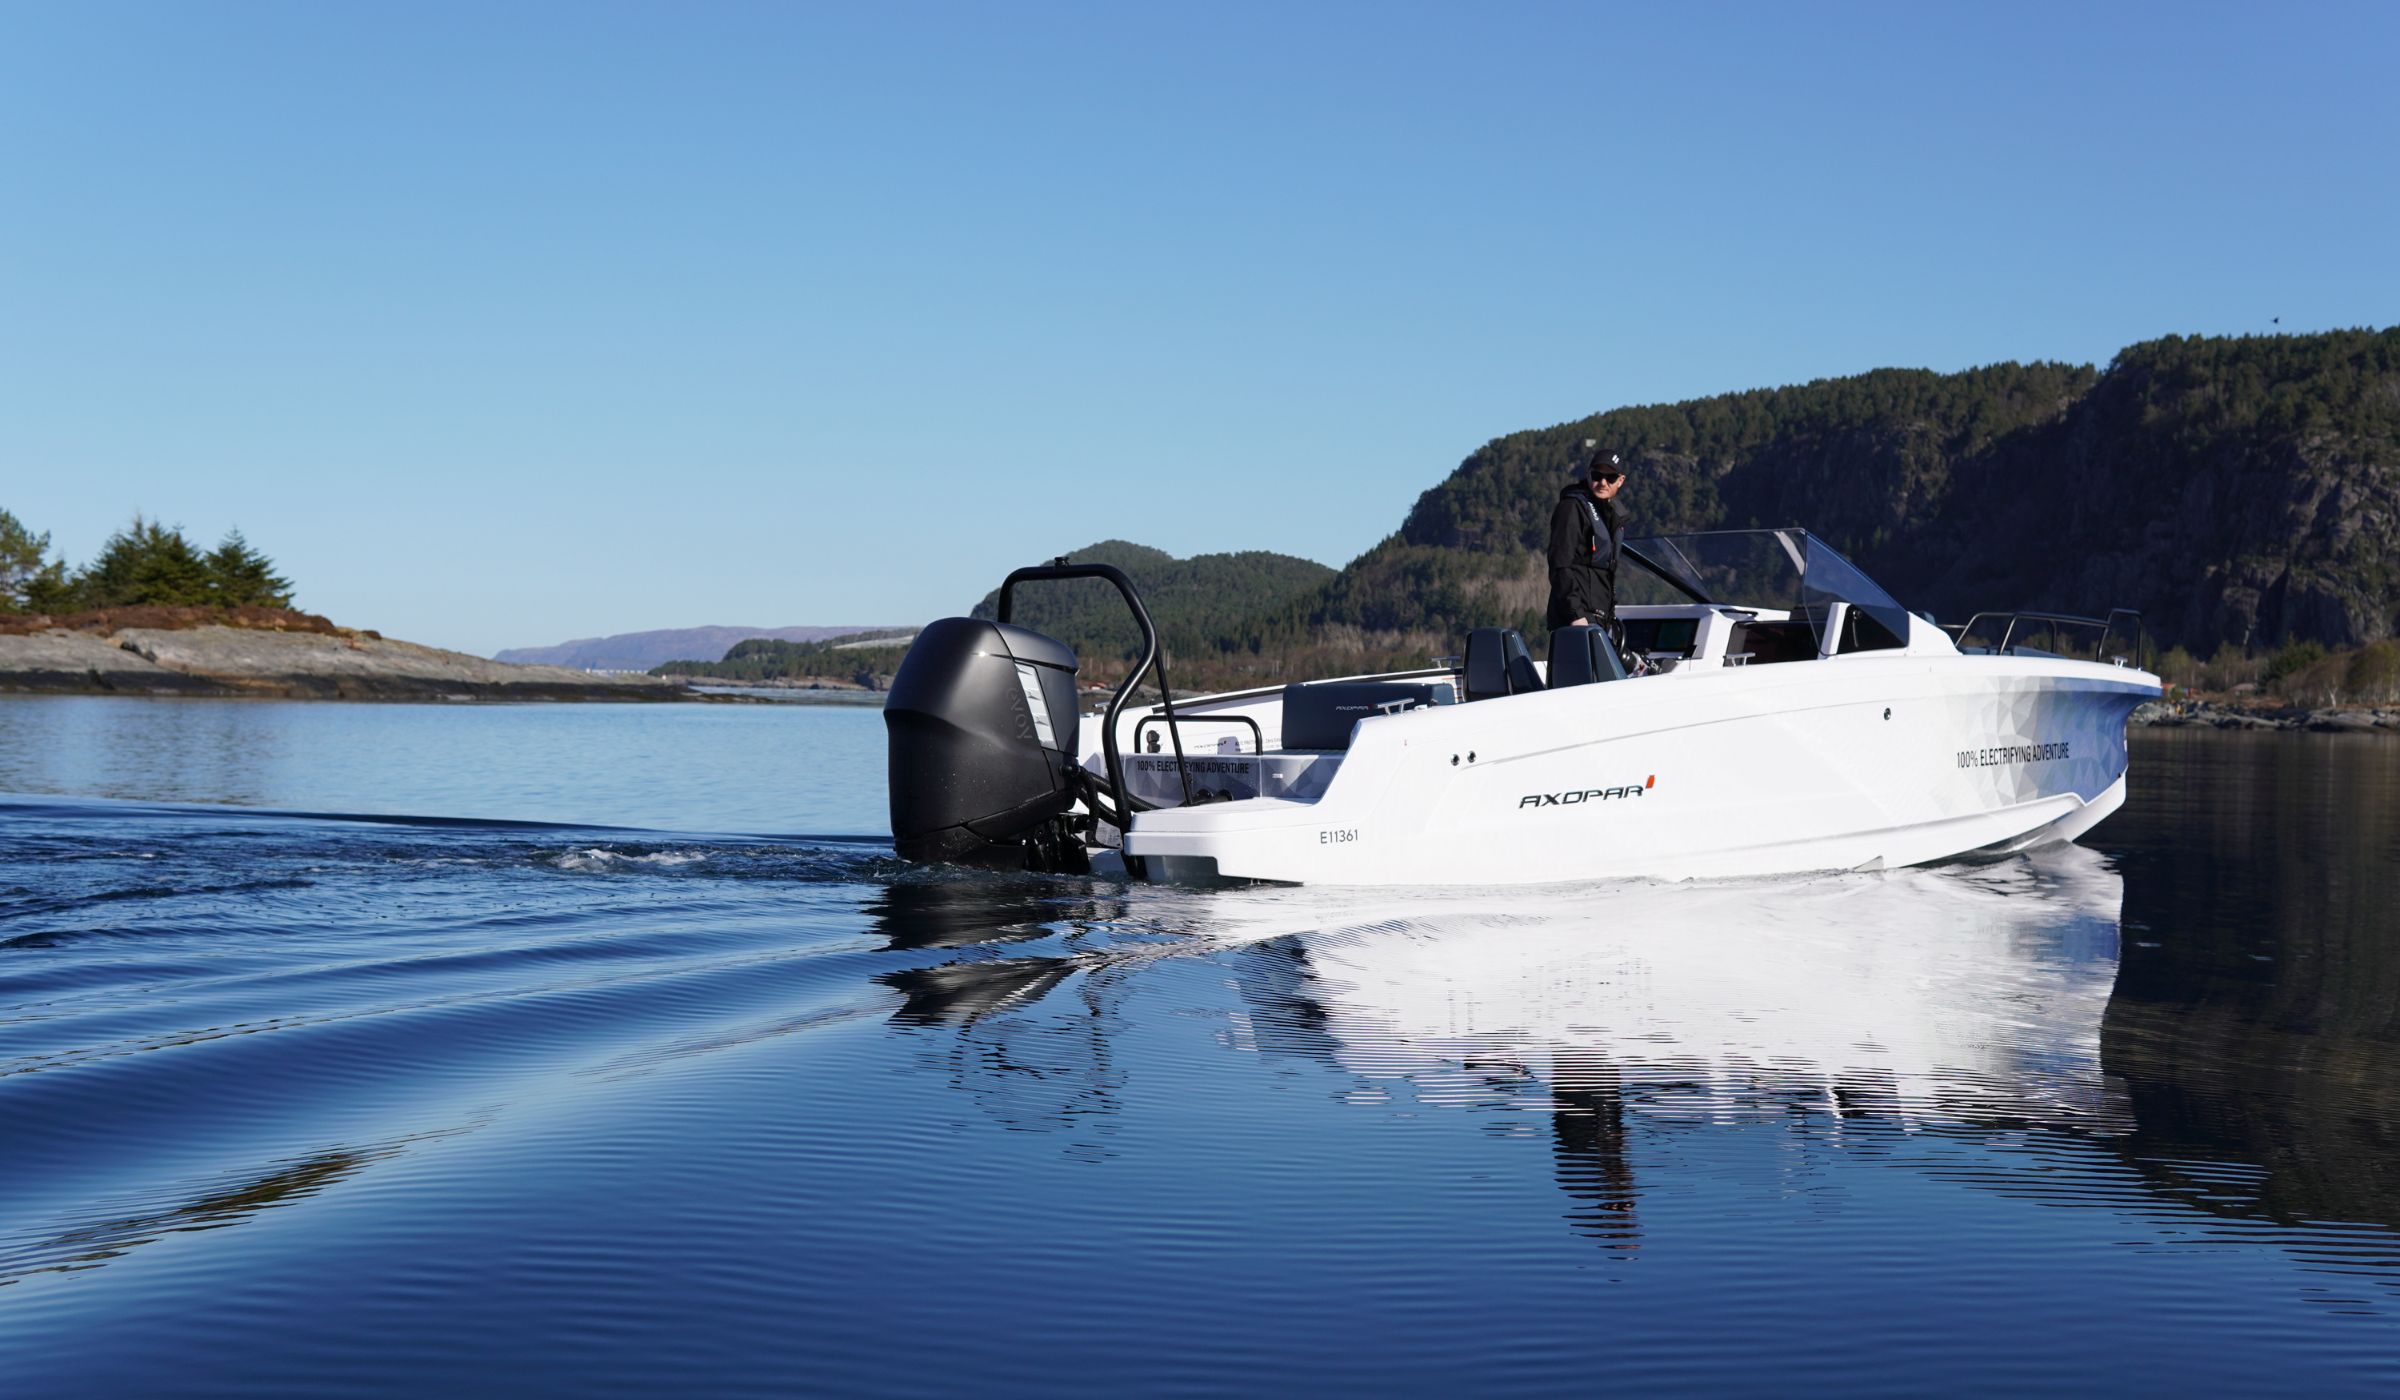 Electric prototype Axopar 25 Powered by Evoy Storm 300hp outboard